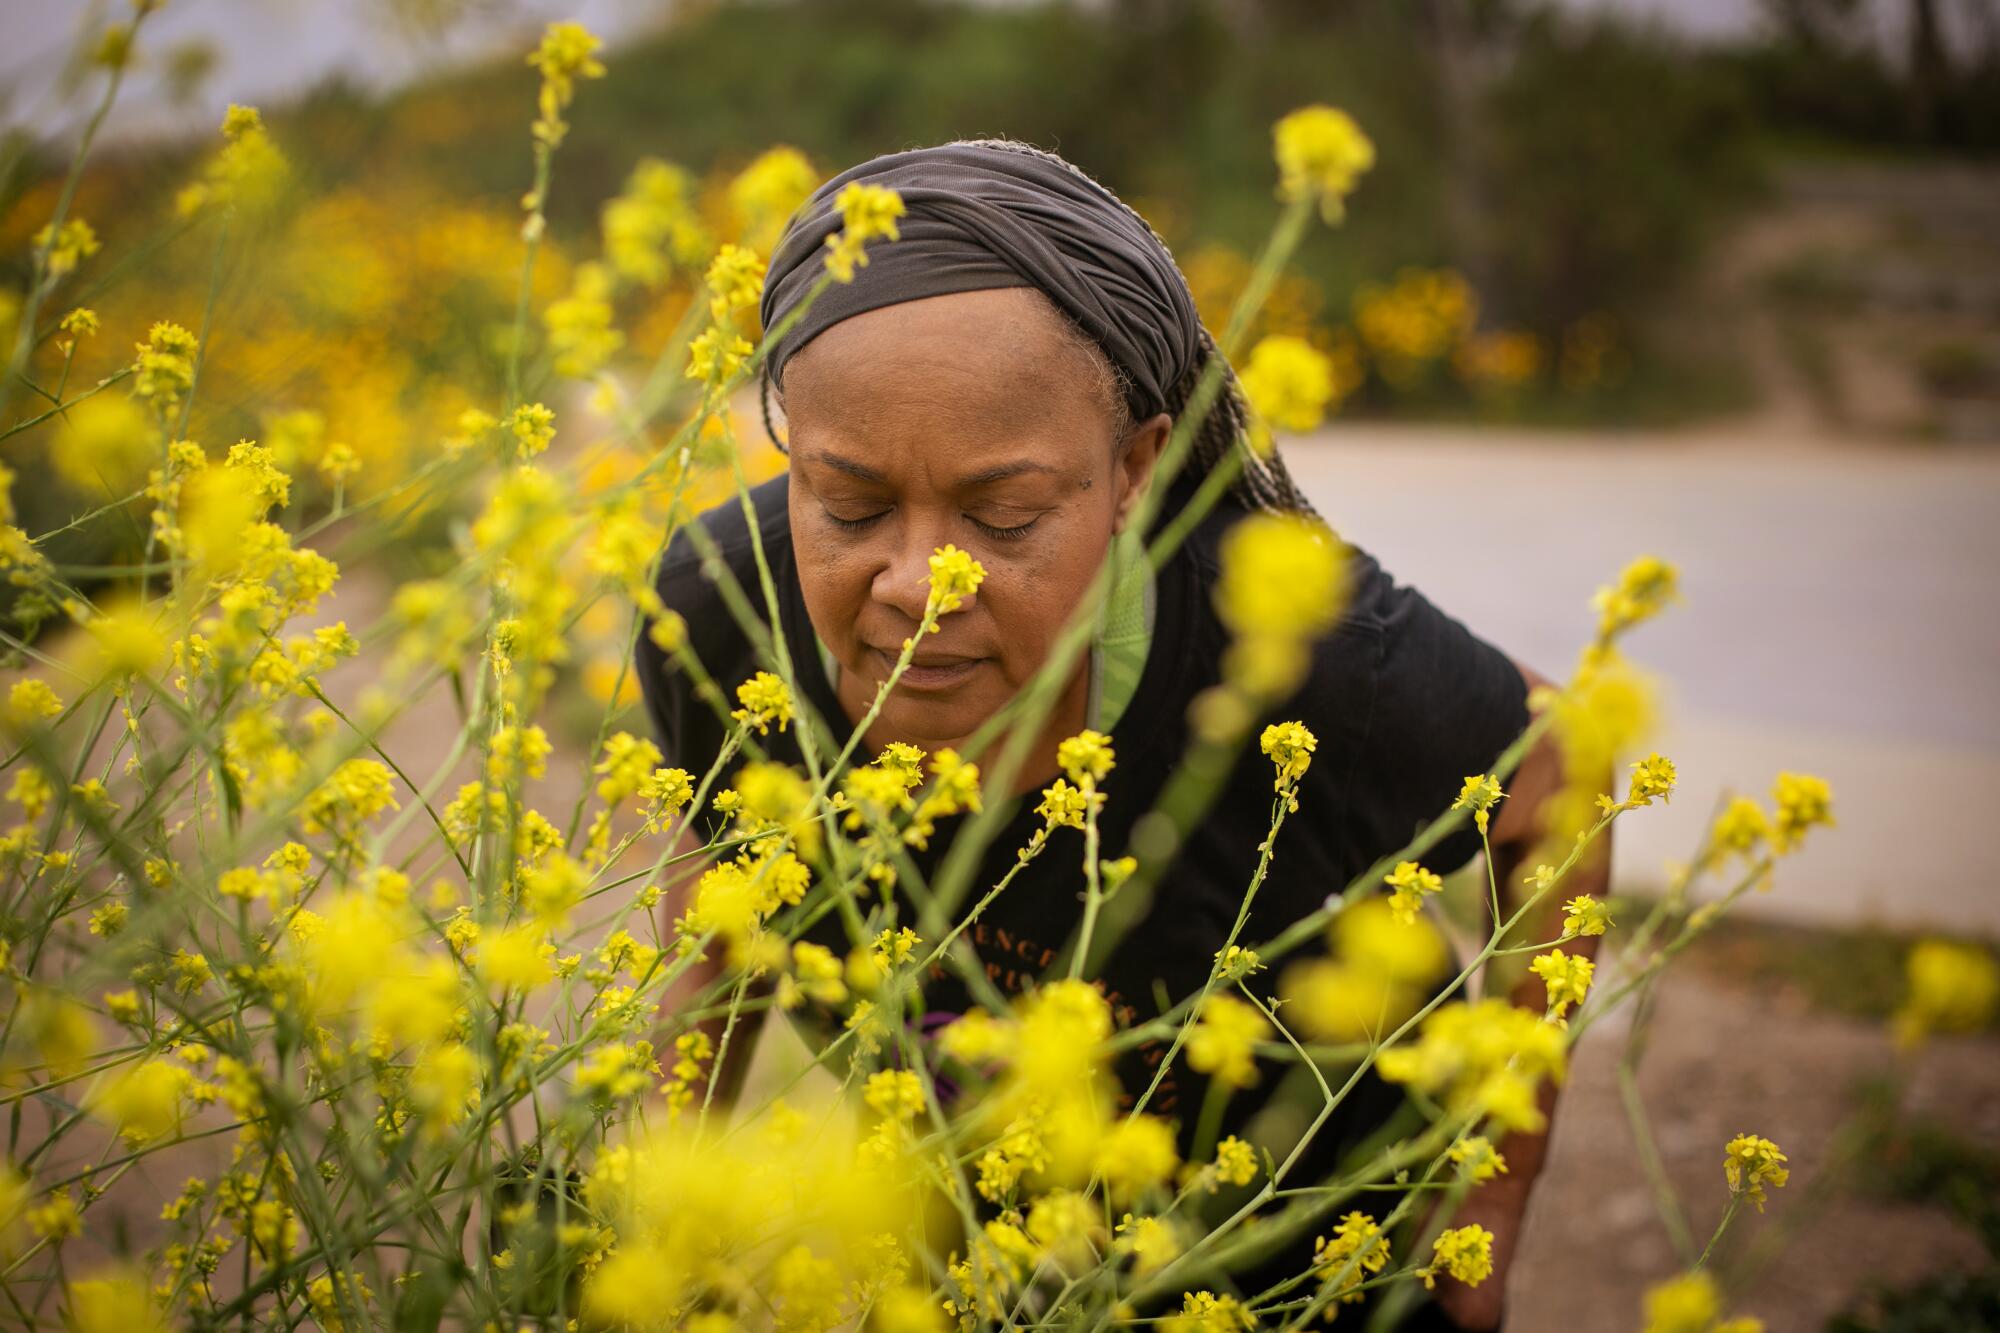  Surrounded by yellow wildflowers and mustard plants Deneen Vaughn stops to catch her breath